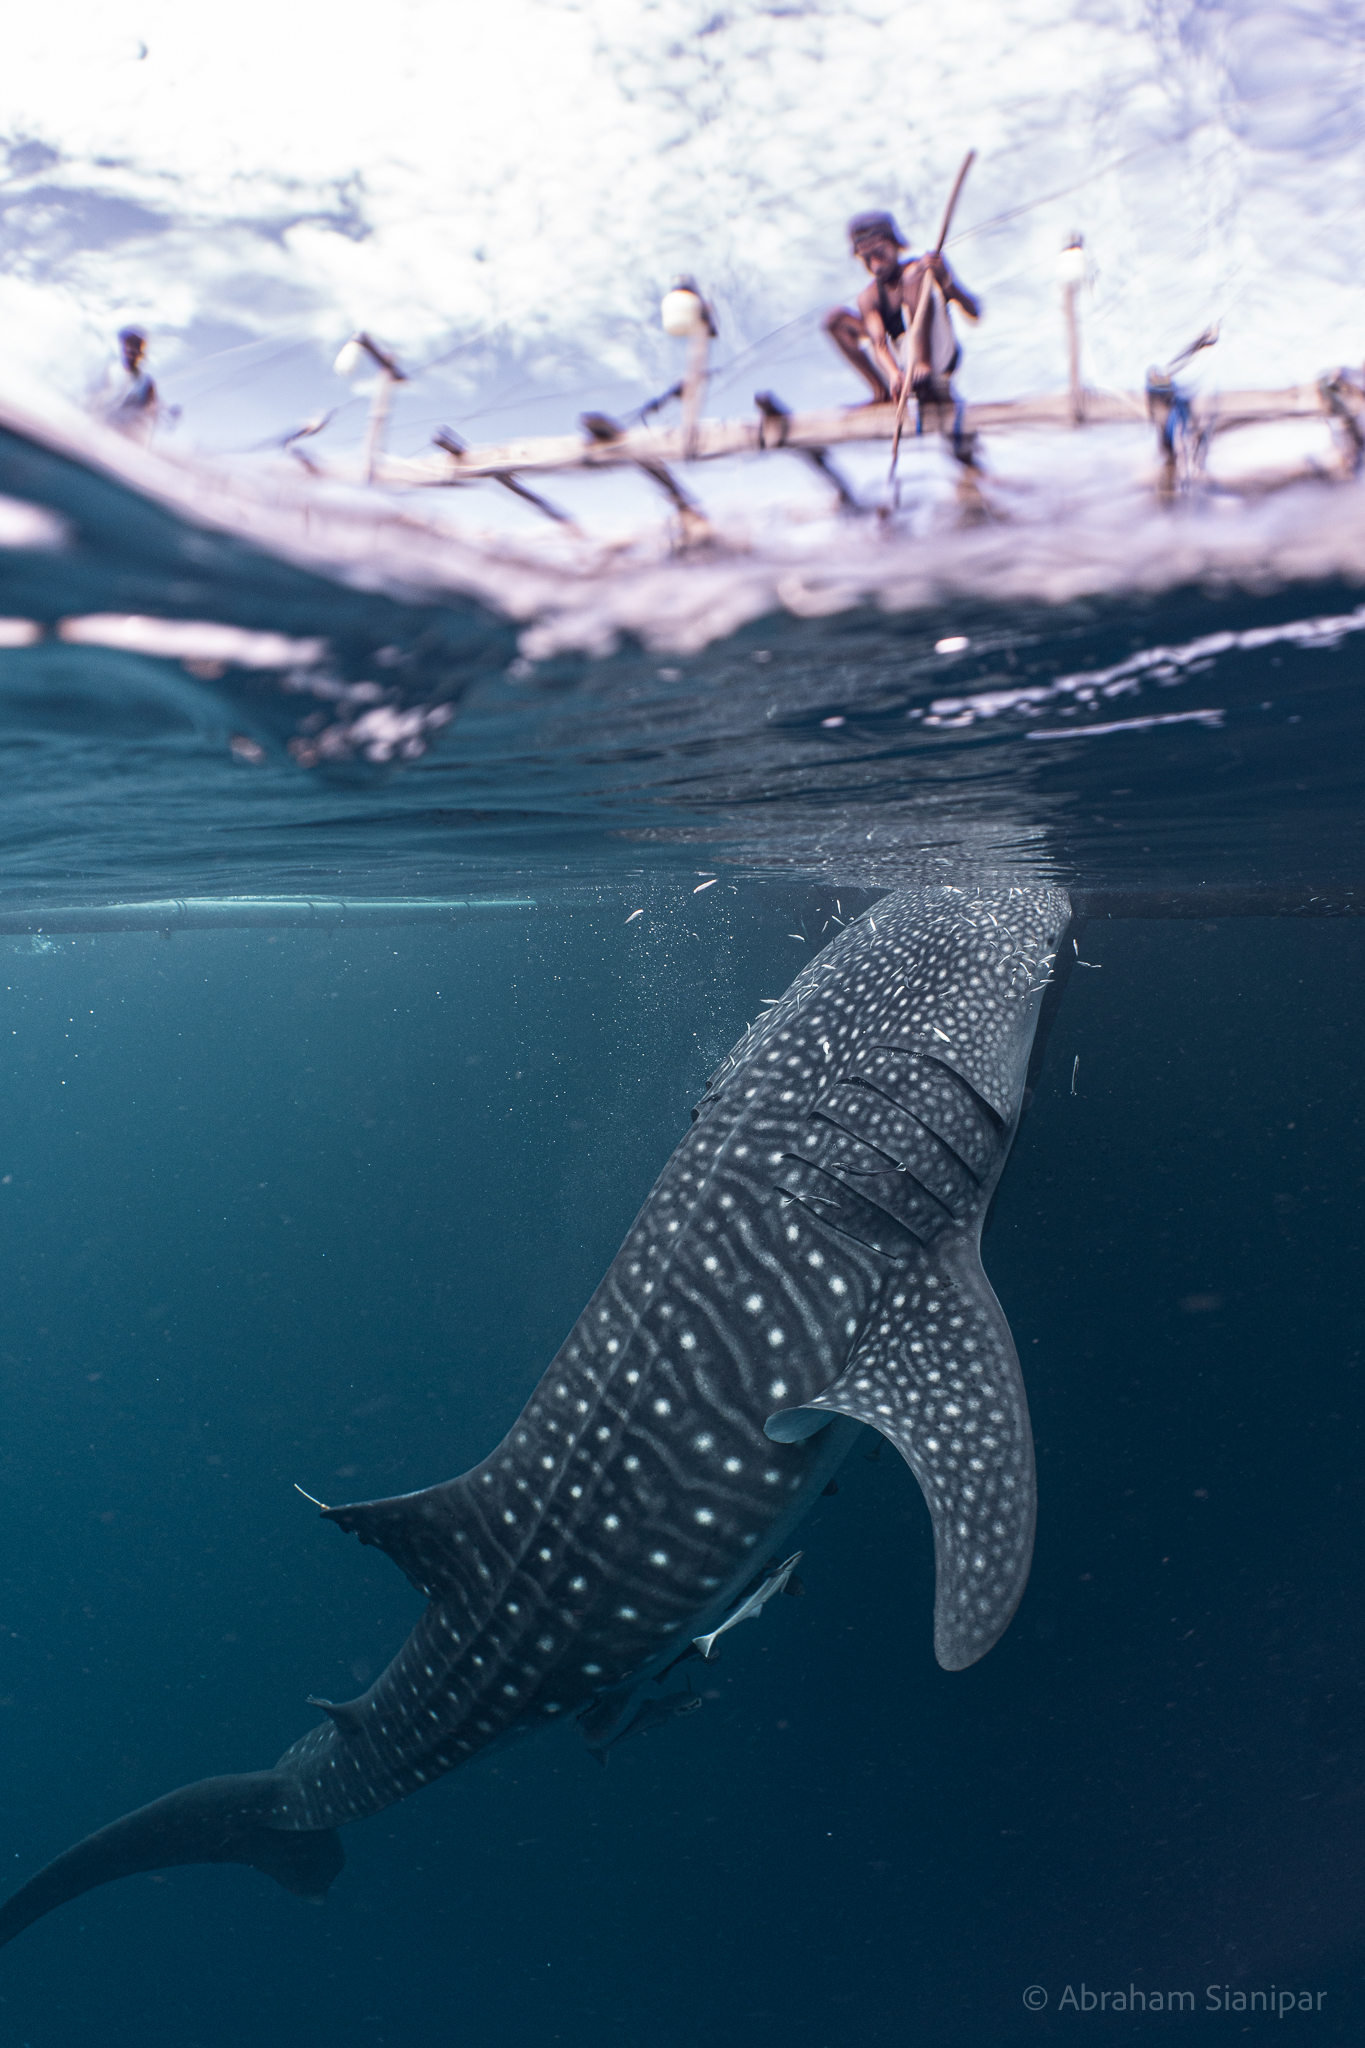 Here’s what we don’t know about whale sharks